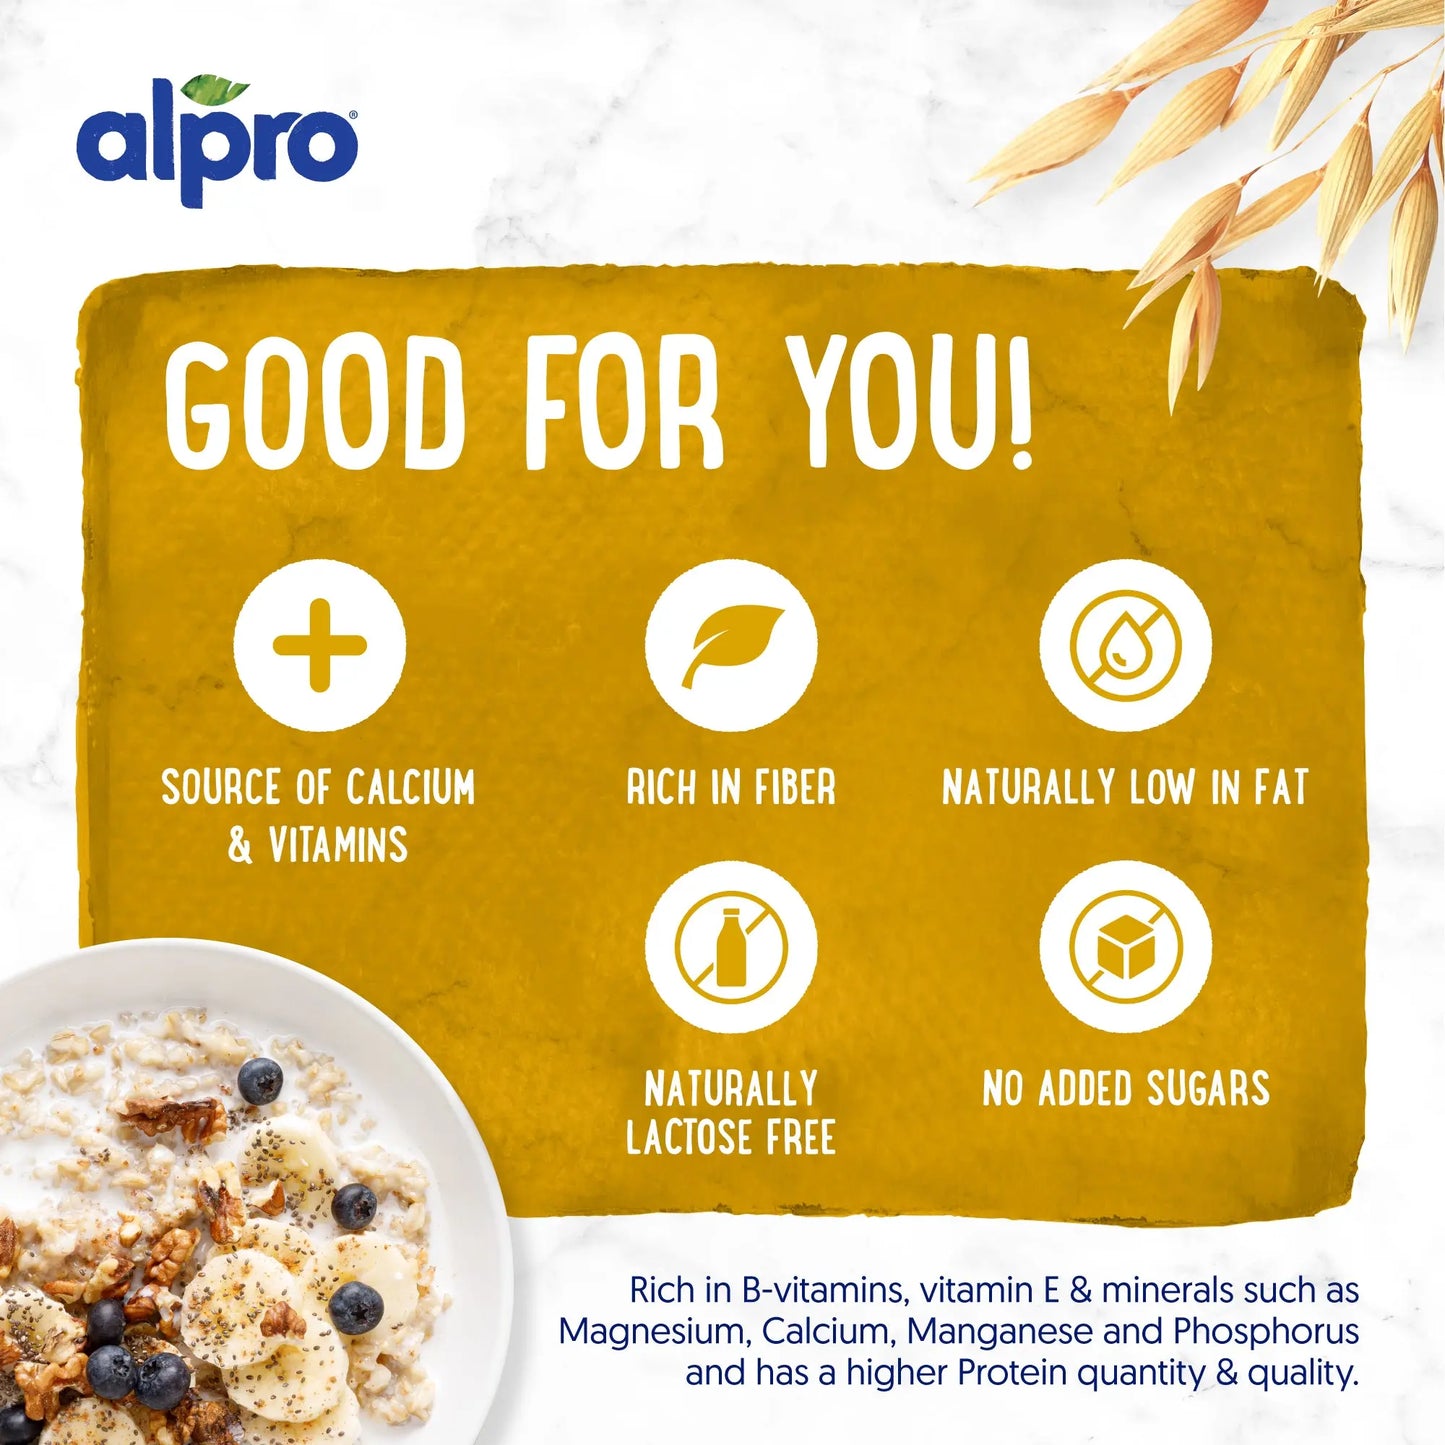 Alpro Drink Oat (1l x 8), 100% Plant Based And Gluten & Dairy Free, Suitable For Vegans, Naturally Free From Lactose, Rich In Nutrients Alpro